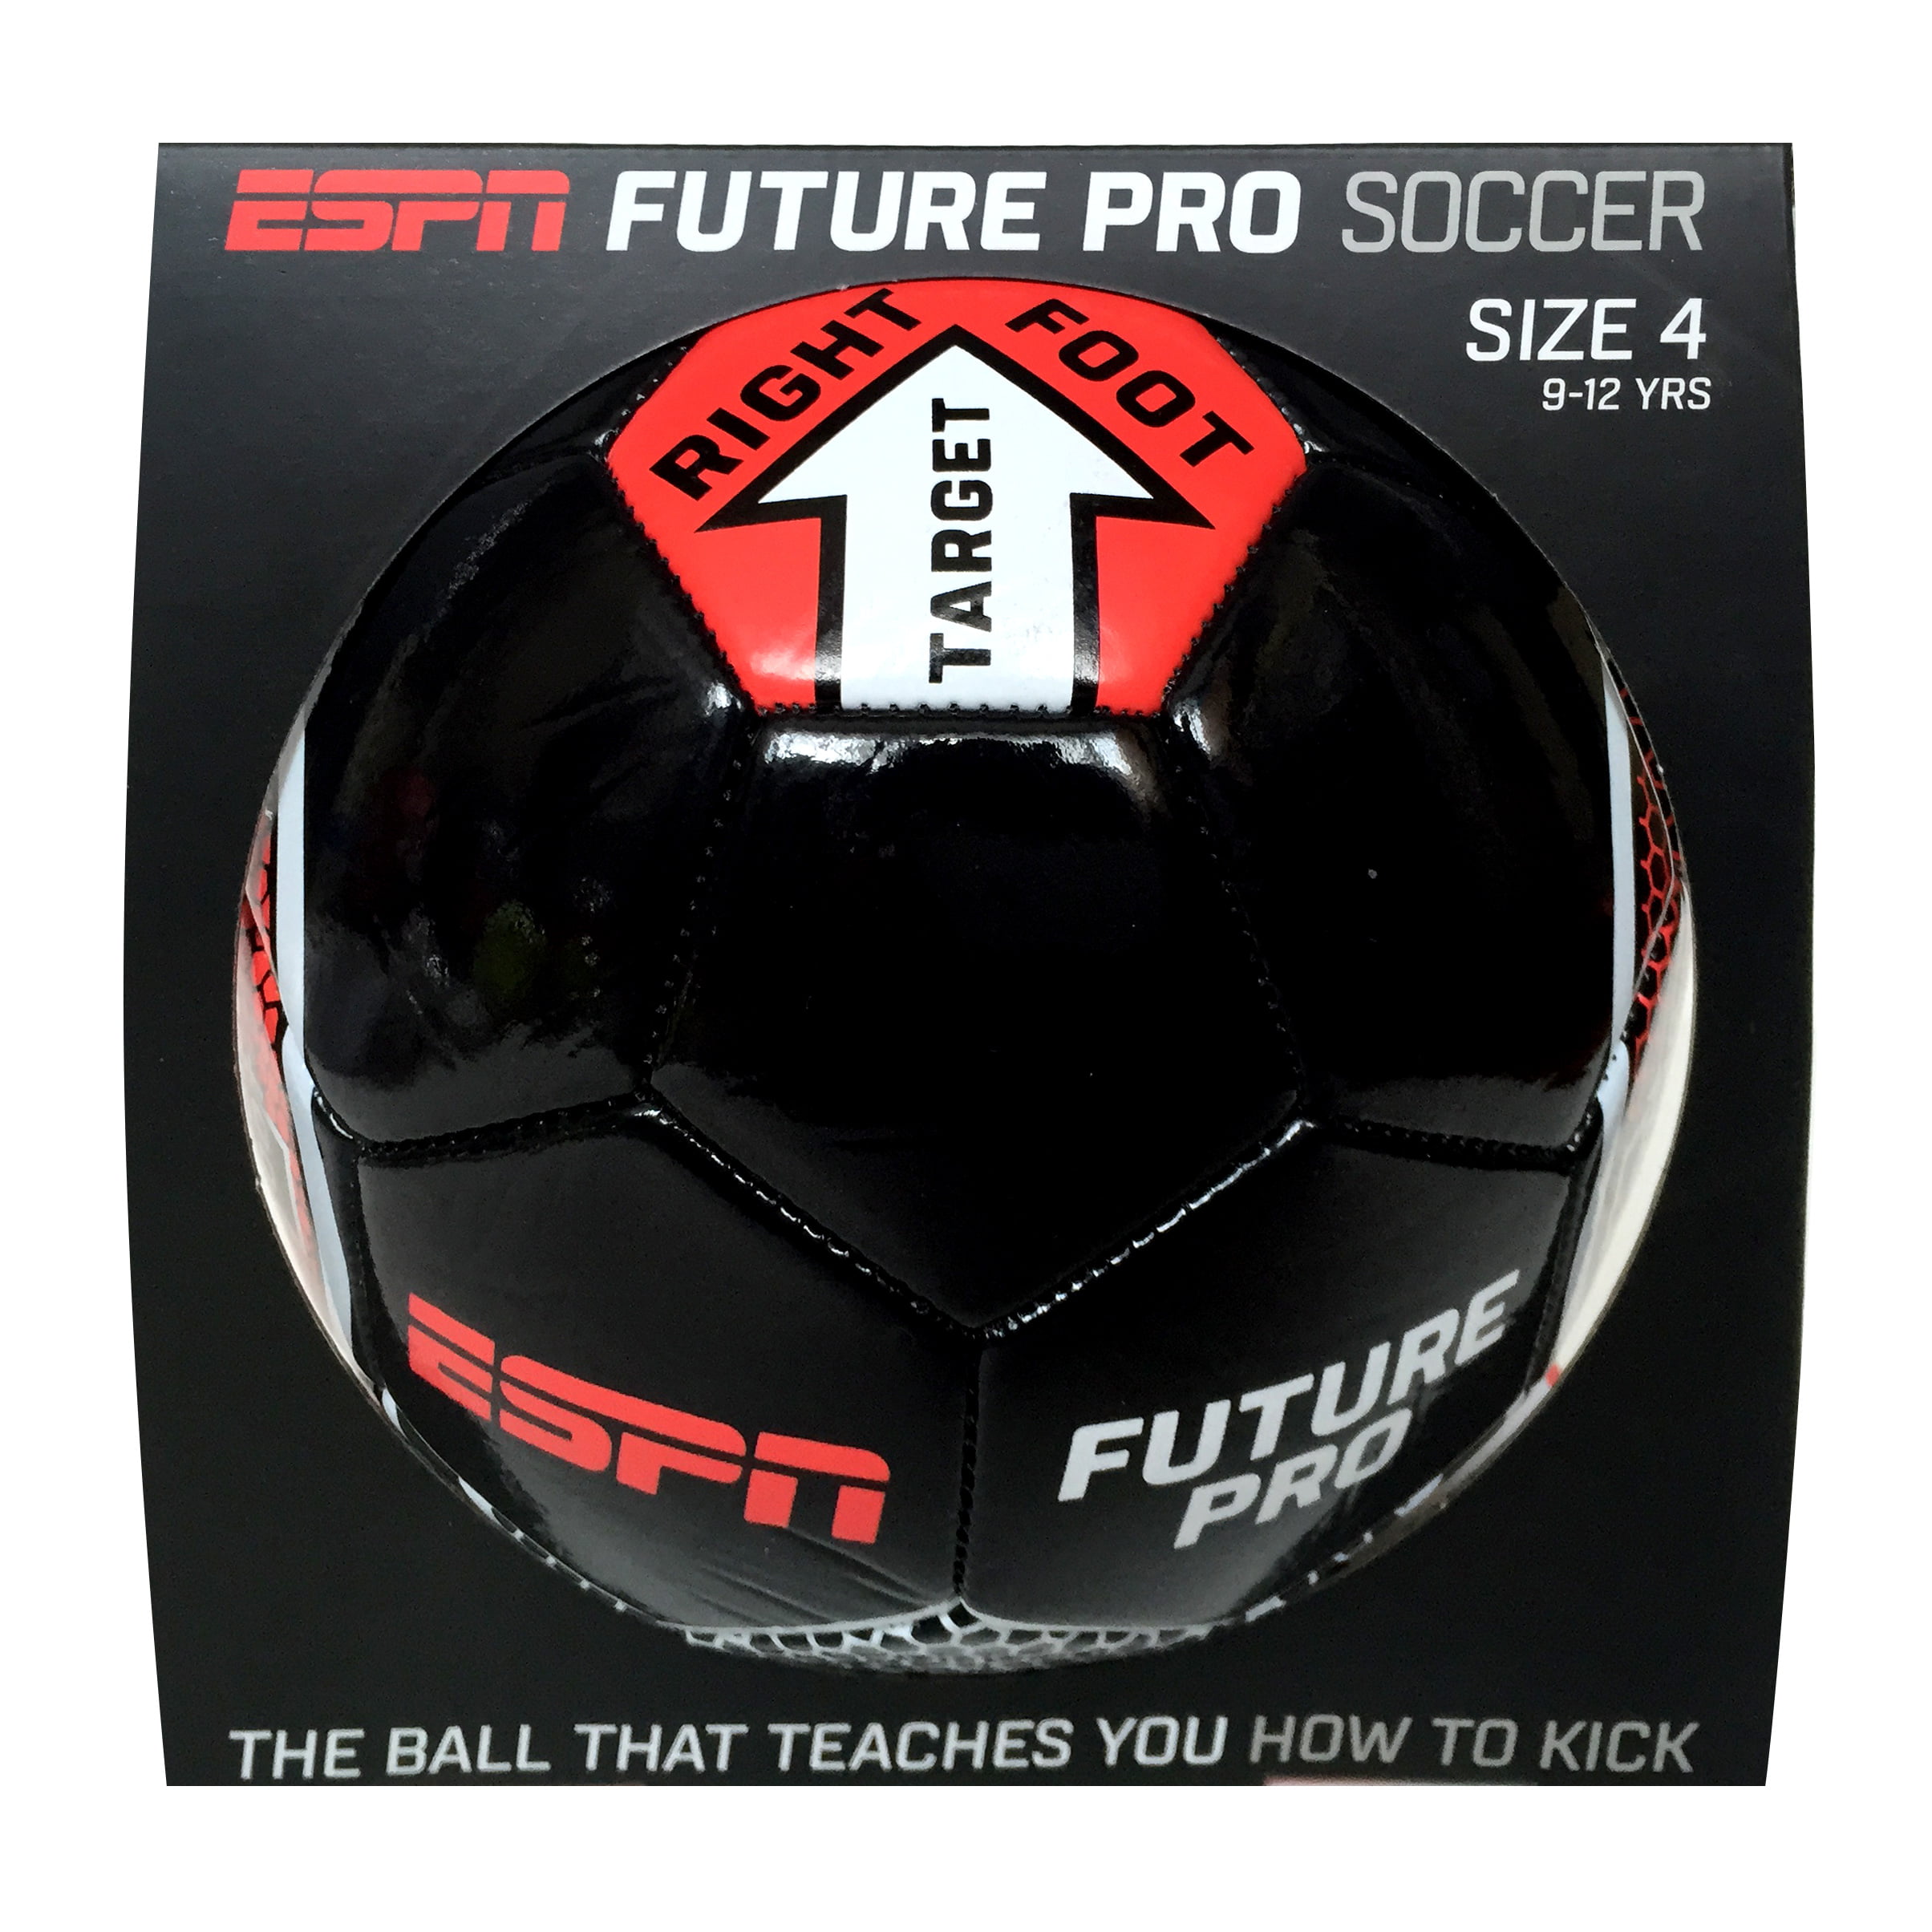 Training Ball ESPN Future Pro Soccer Ball NEW Size 4-9-12 Years old 